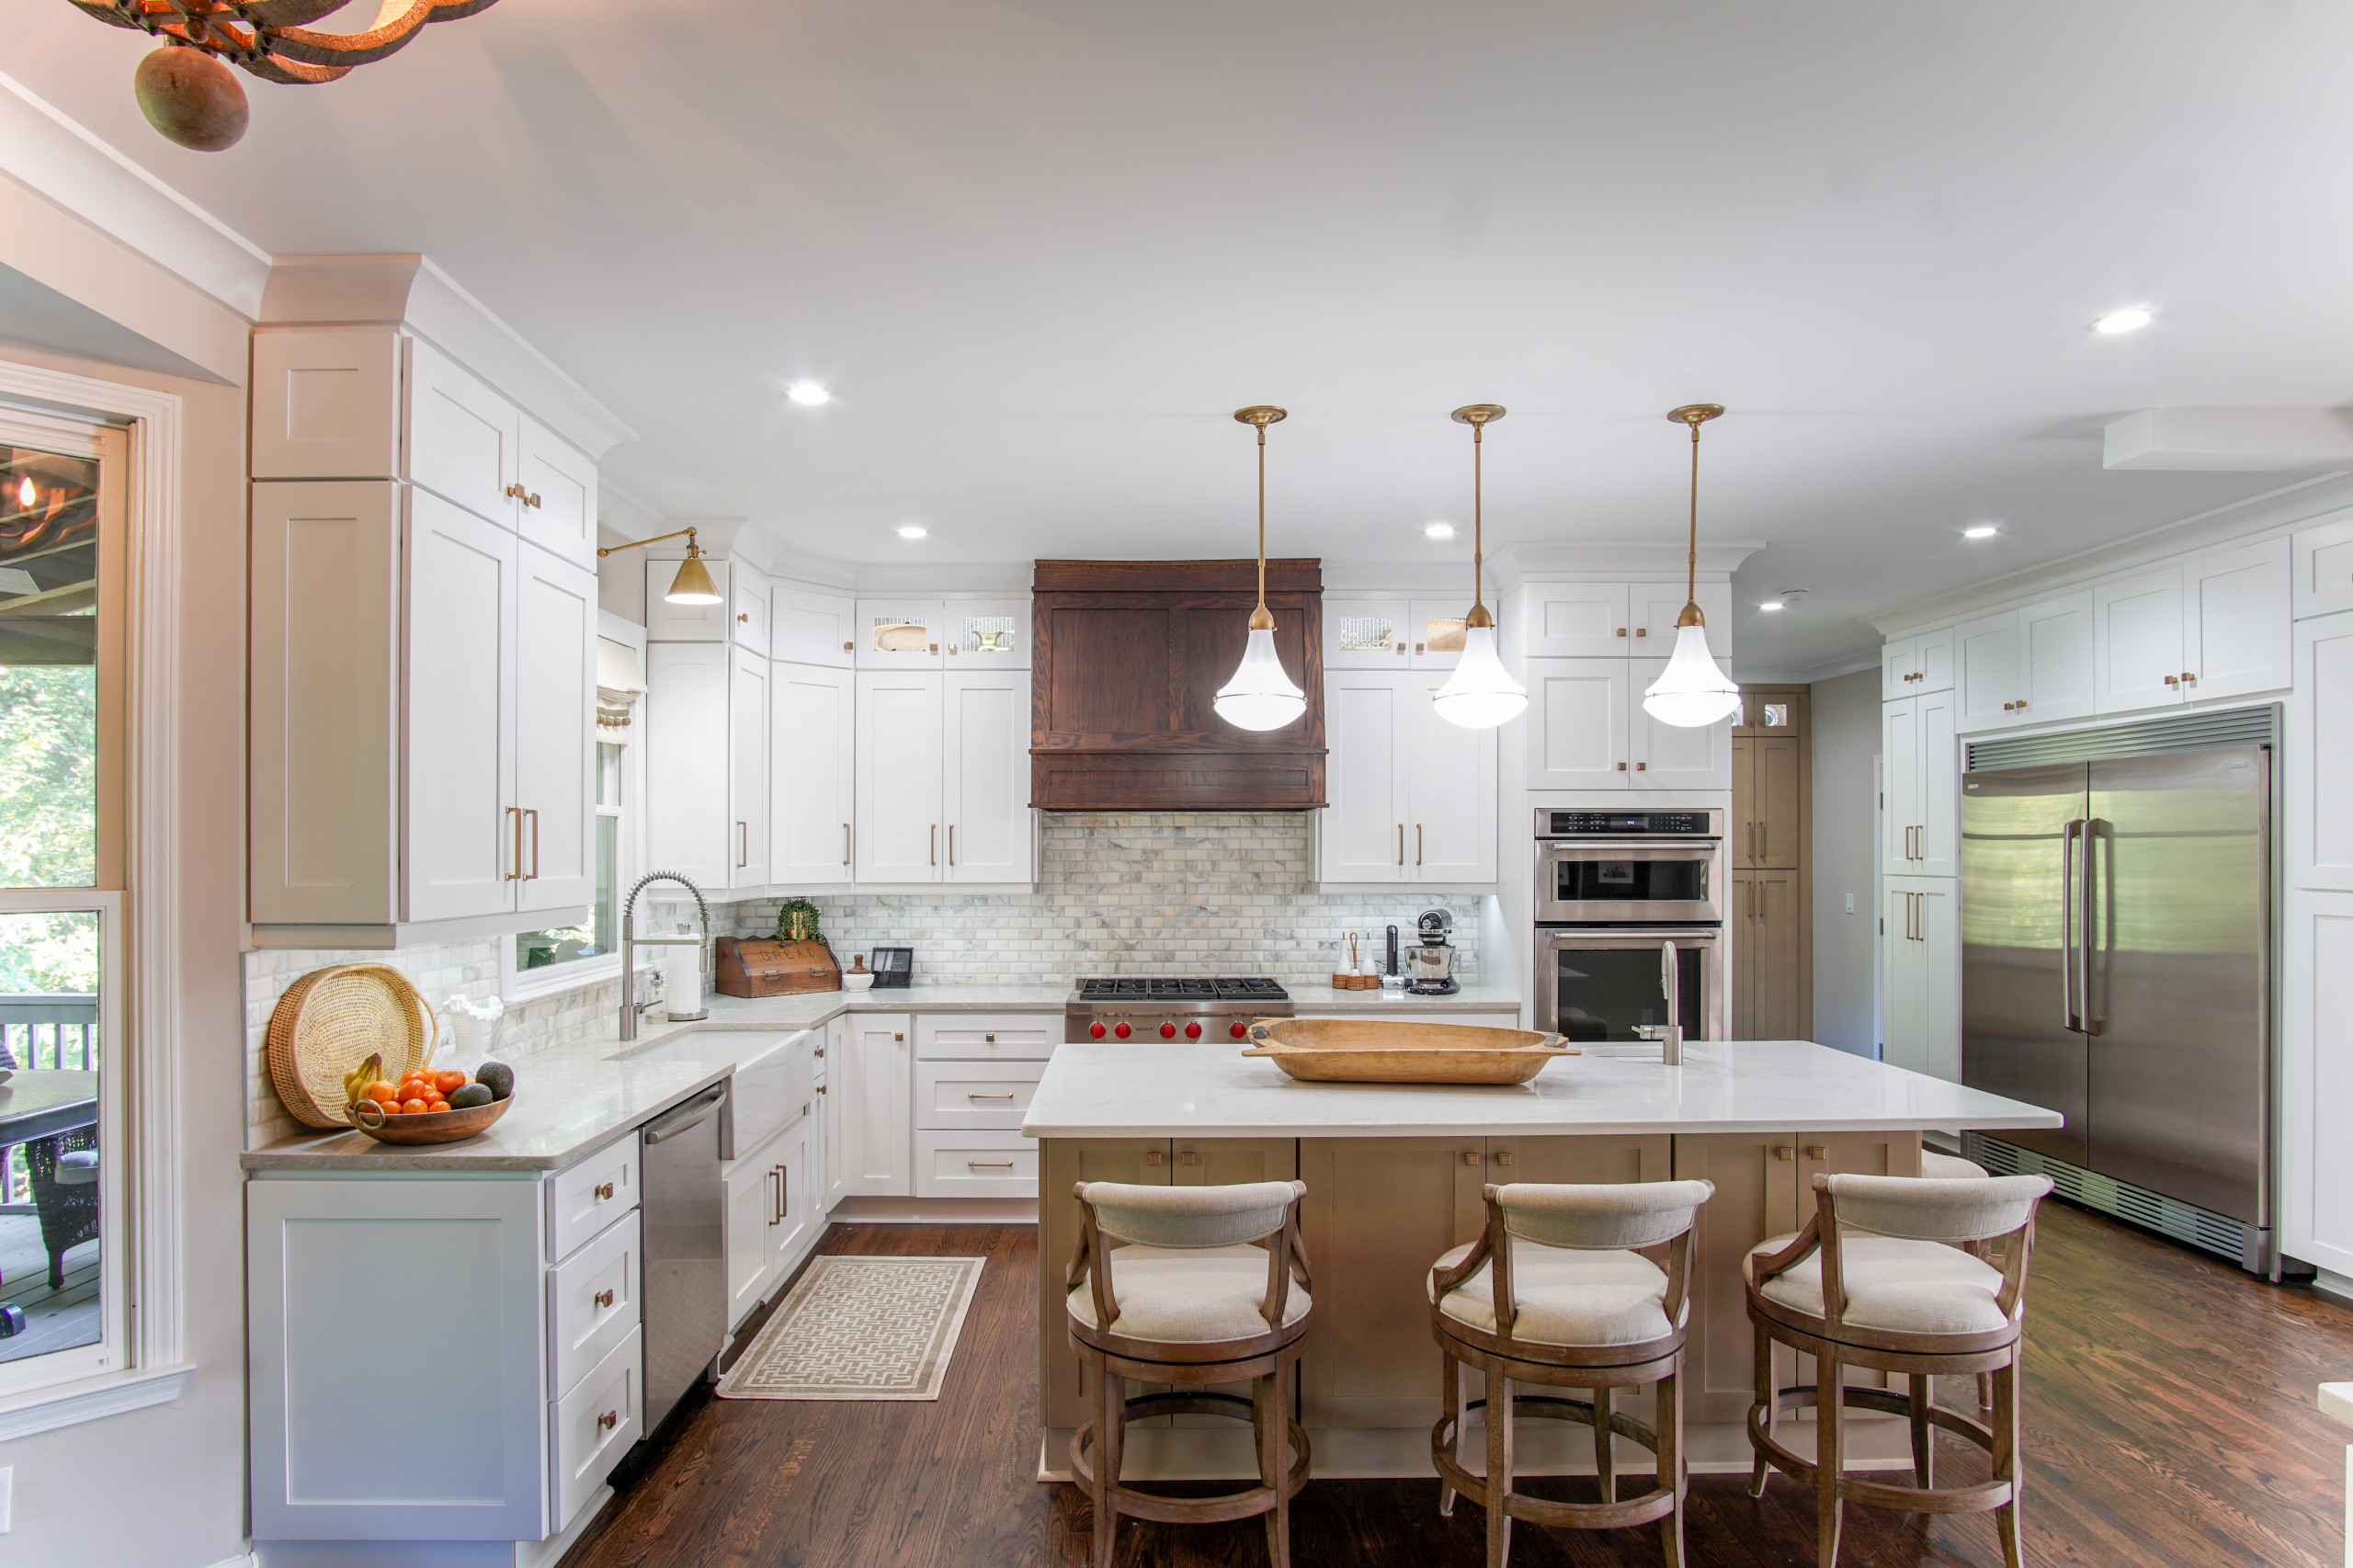 18 Beautiful Kitchen With Subway Tile Backsplash Pictures Ideas October 2020 Houzz,How To Organize A Home Office On A Budget